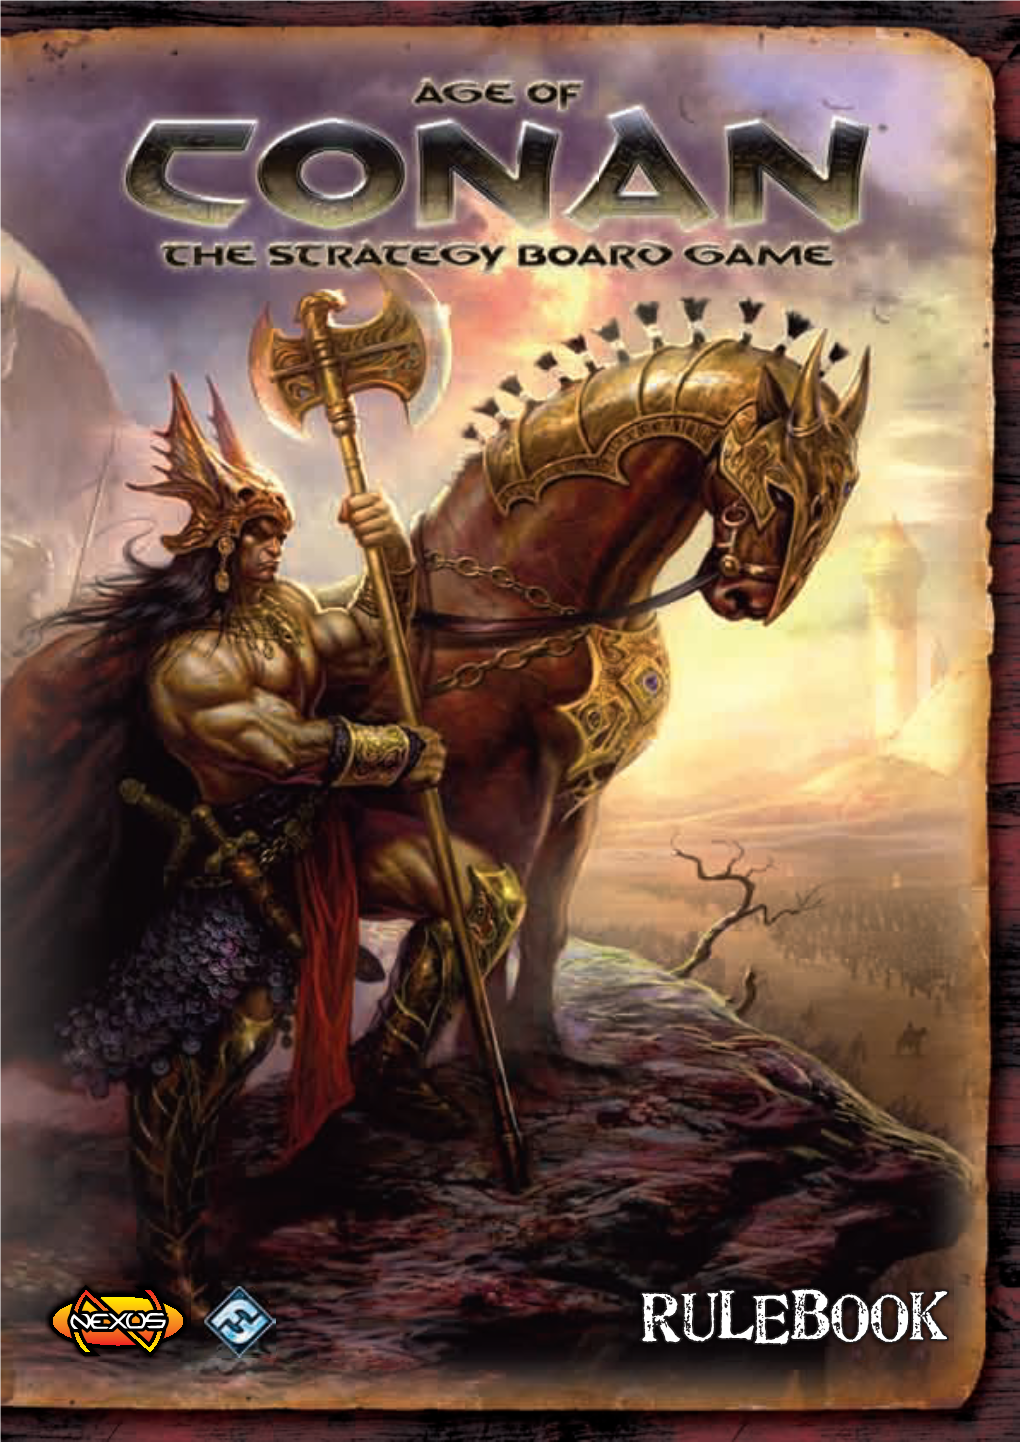 Rules for Age of Conan